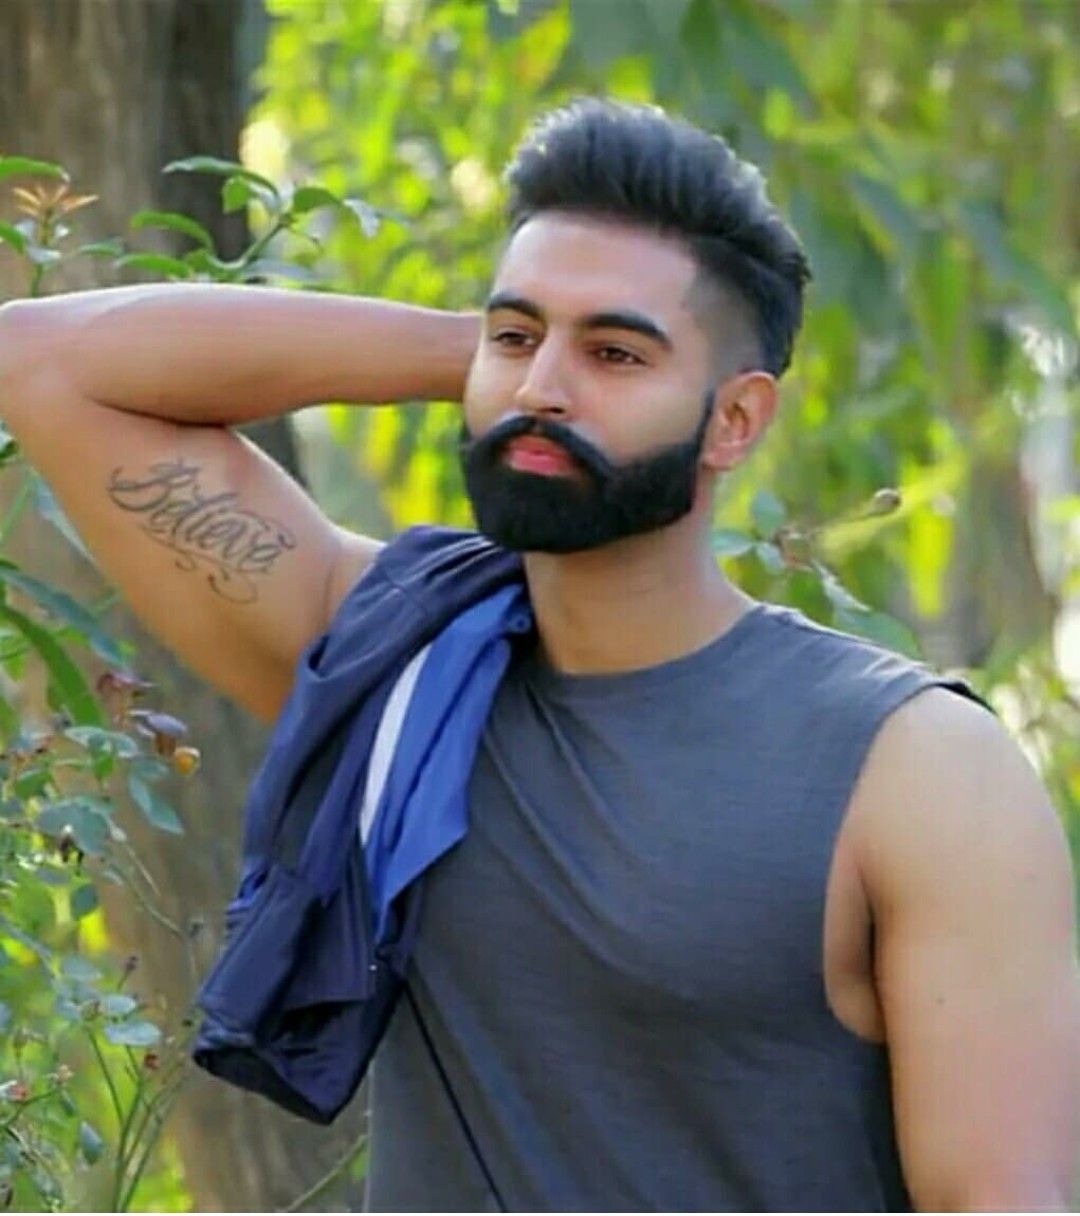 Noted singer Parmish Verma challaned for riding without helmet : The  Tribune India